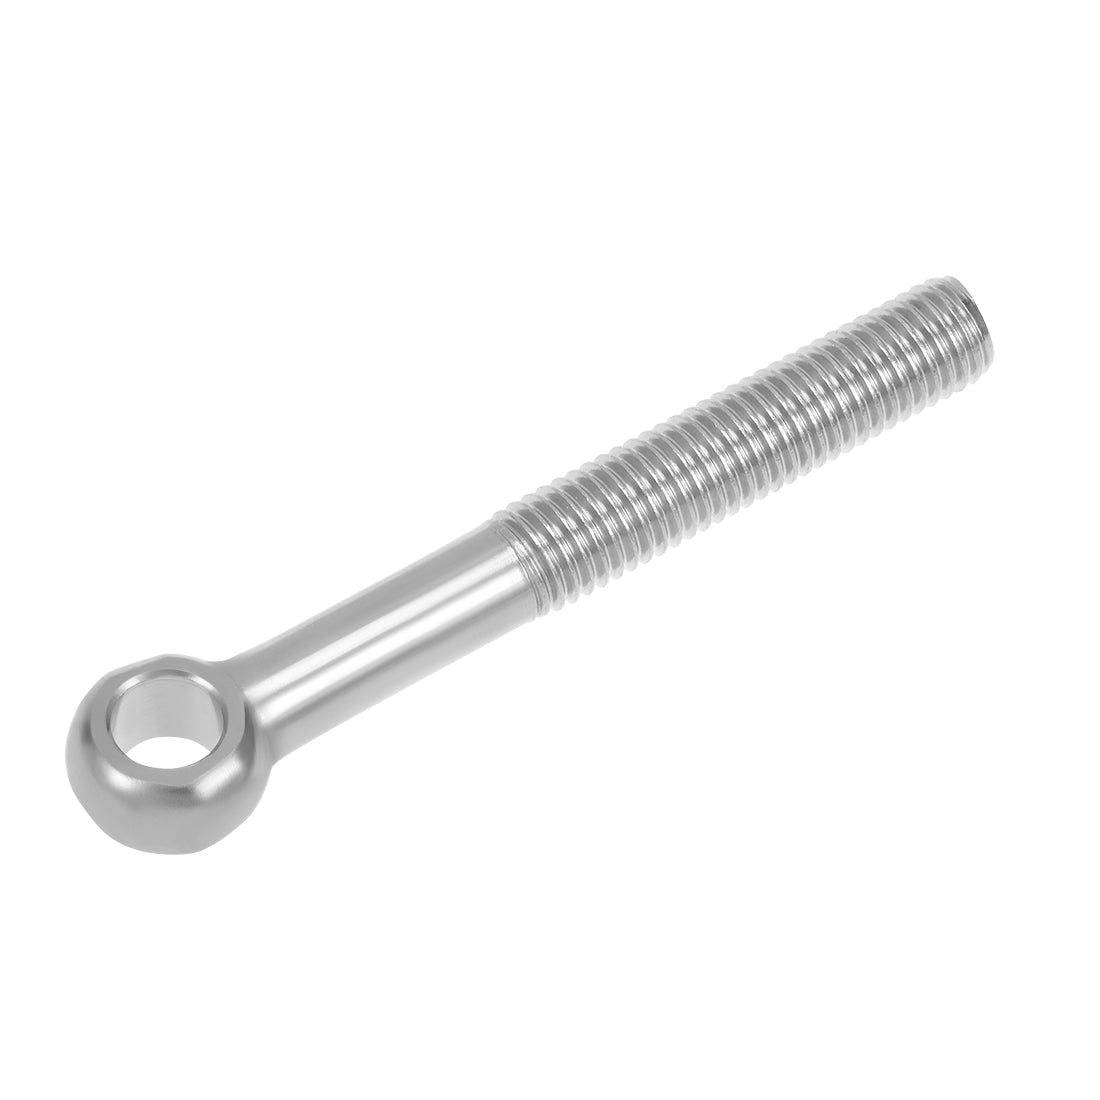 uxcell Uxcell M14 x 110mm Machinery Shoulder Swing Lifting Eye Bolt 304 Stainless Steel Metric Thread